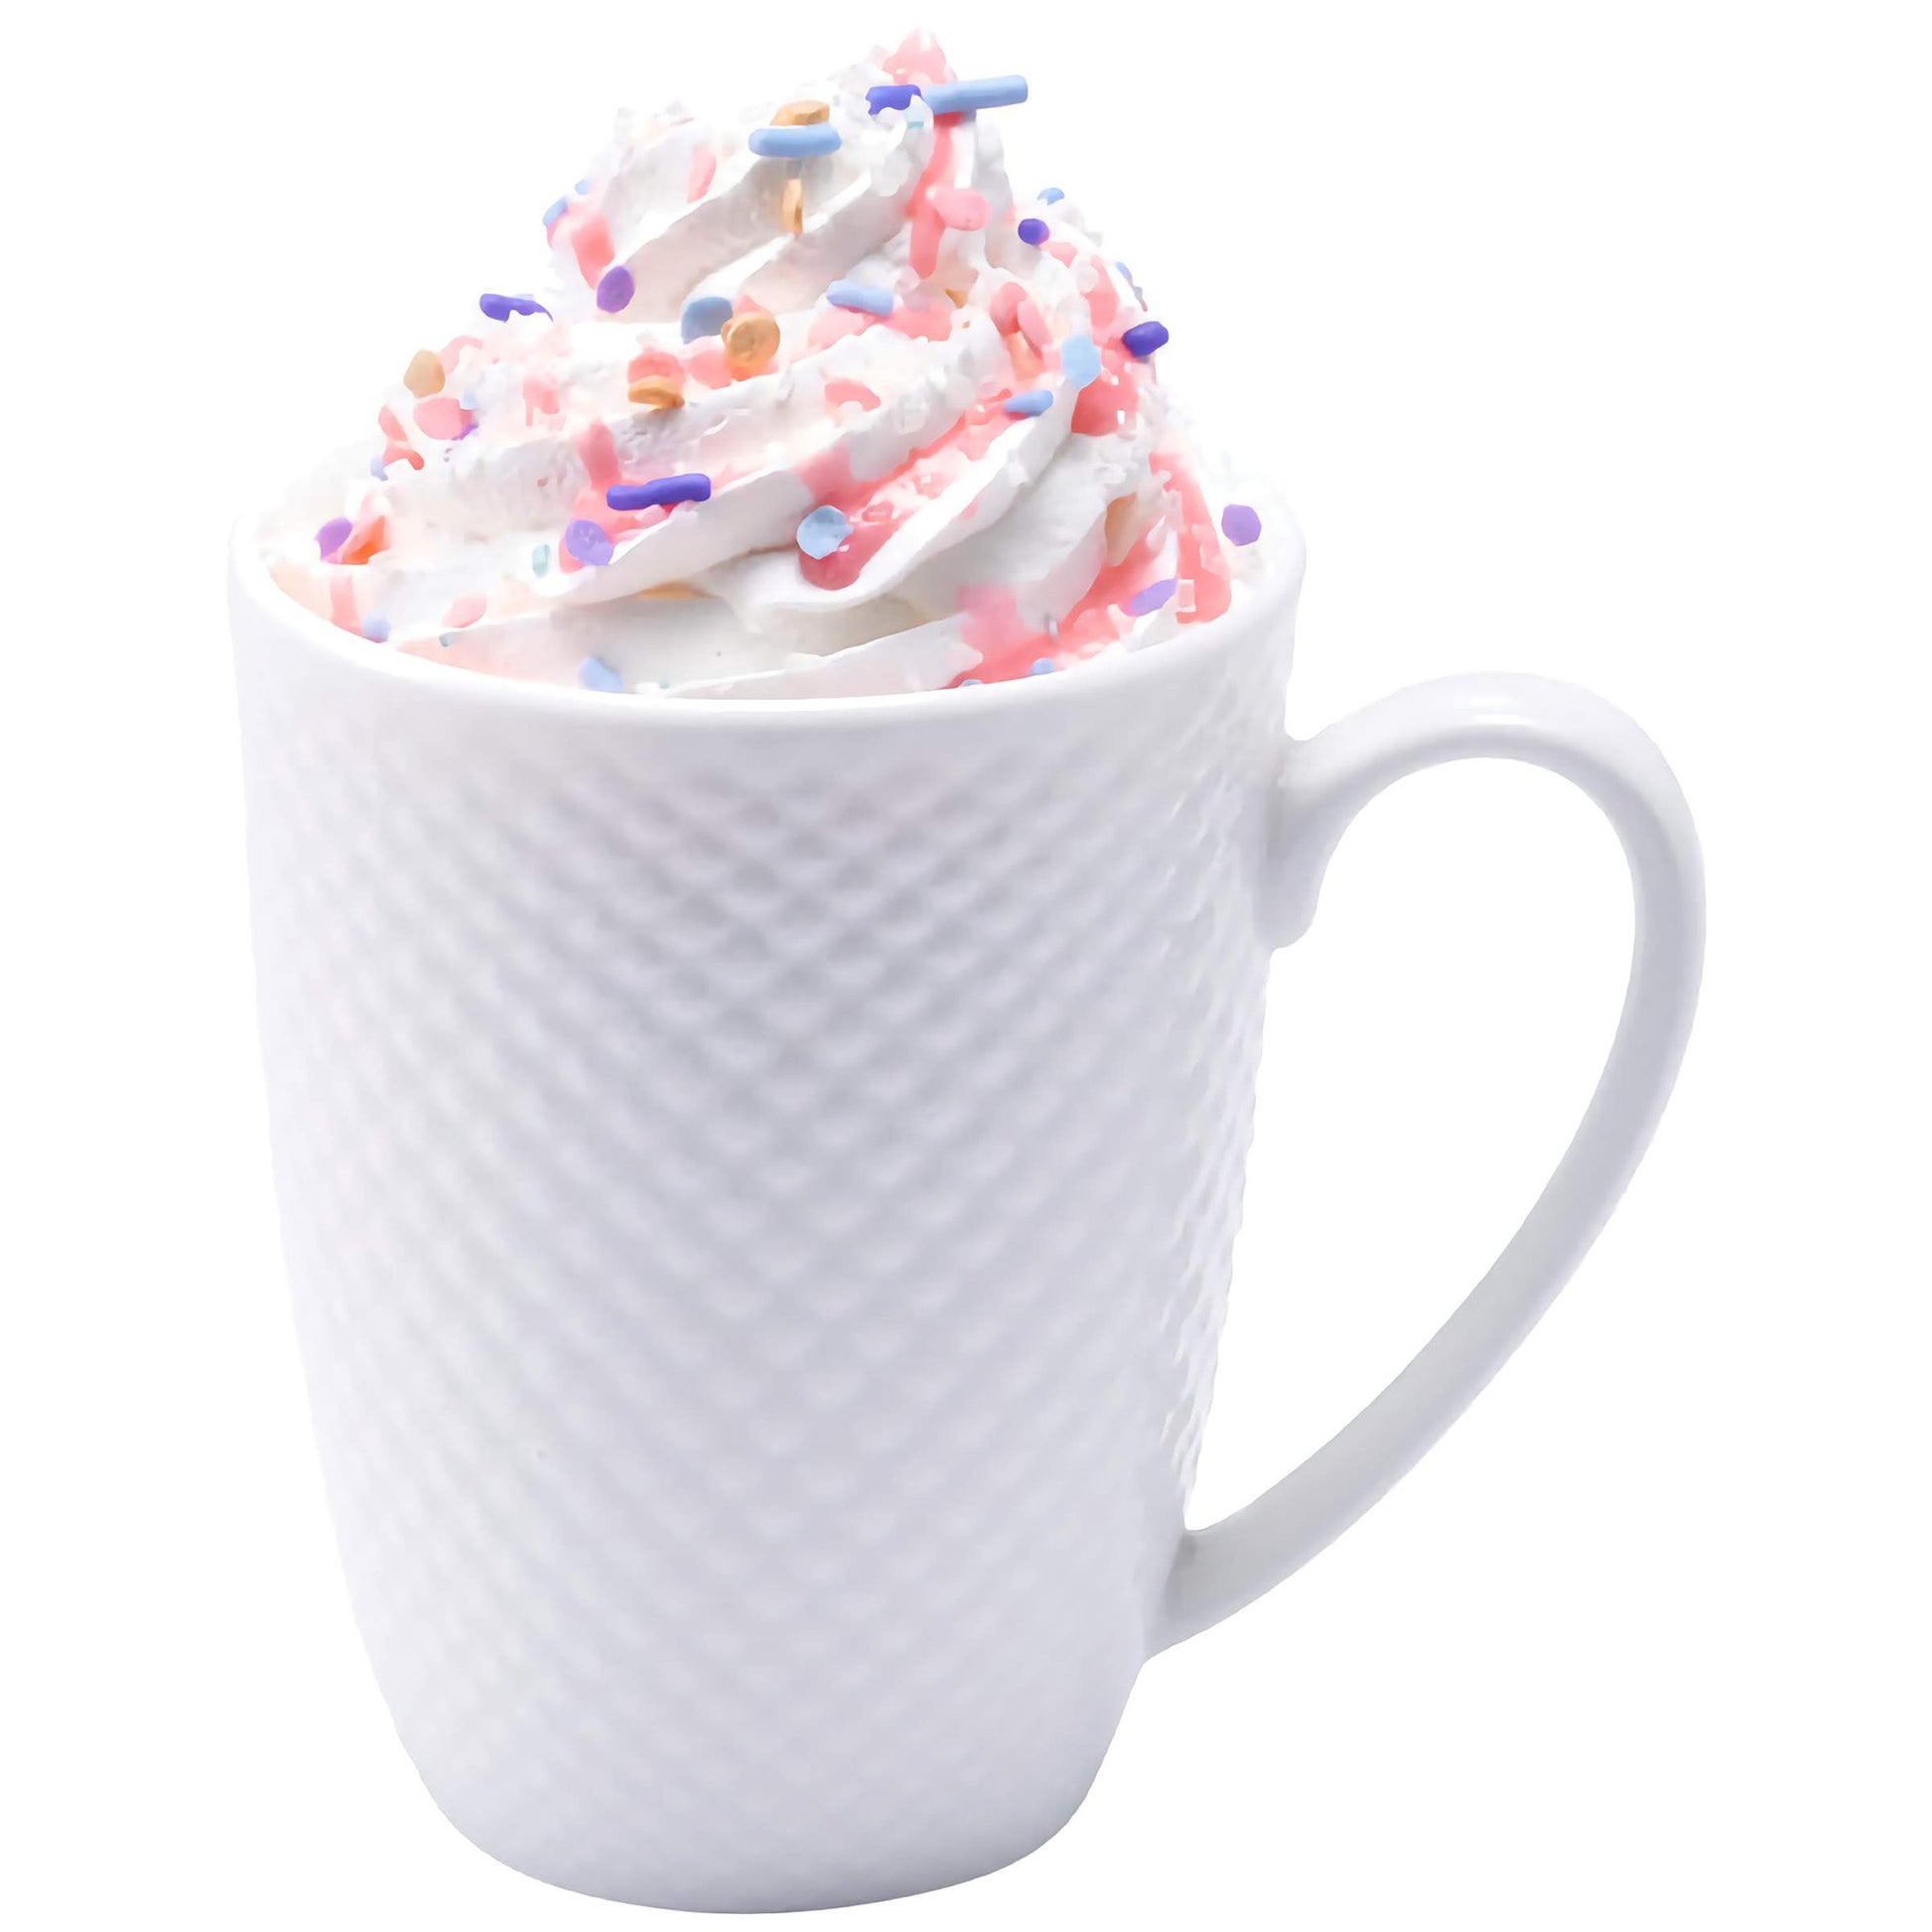 Here, the sprinkles are used as a topping on whipped cream that crowns a mug of hot chocolate. The colors add a playful contrast to the white cream, enhancing the visual appeal of this cozy beverage.